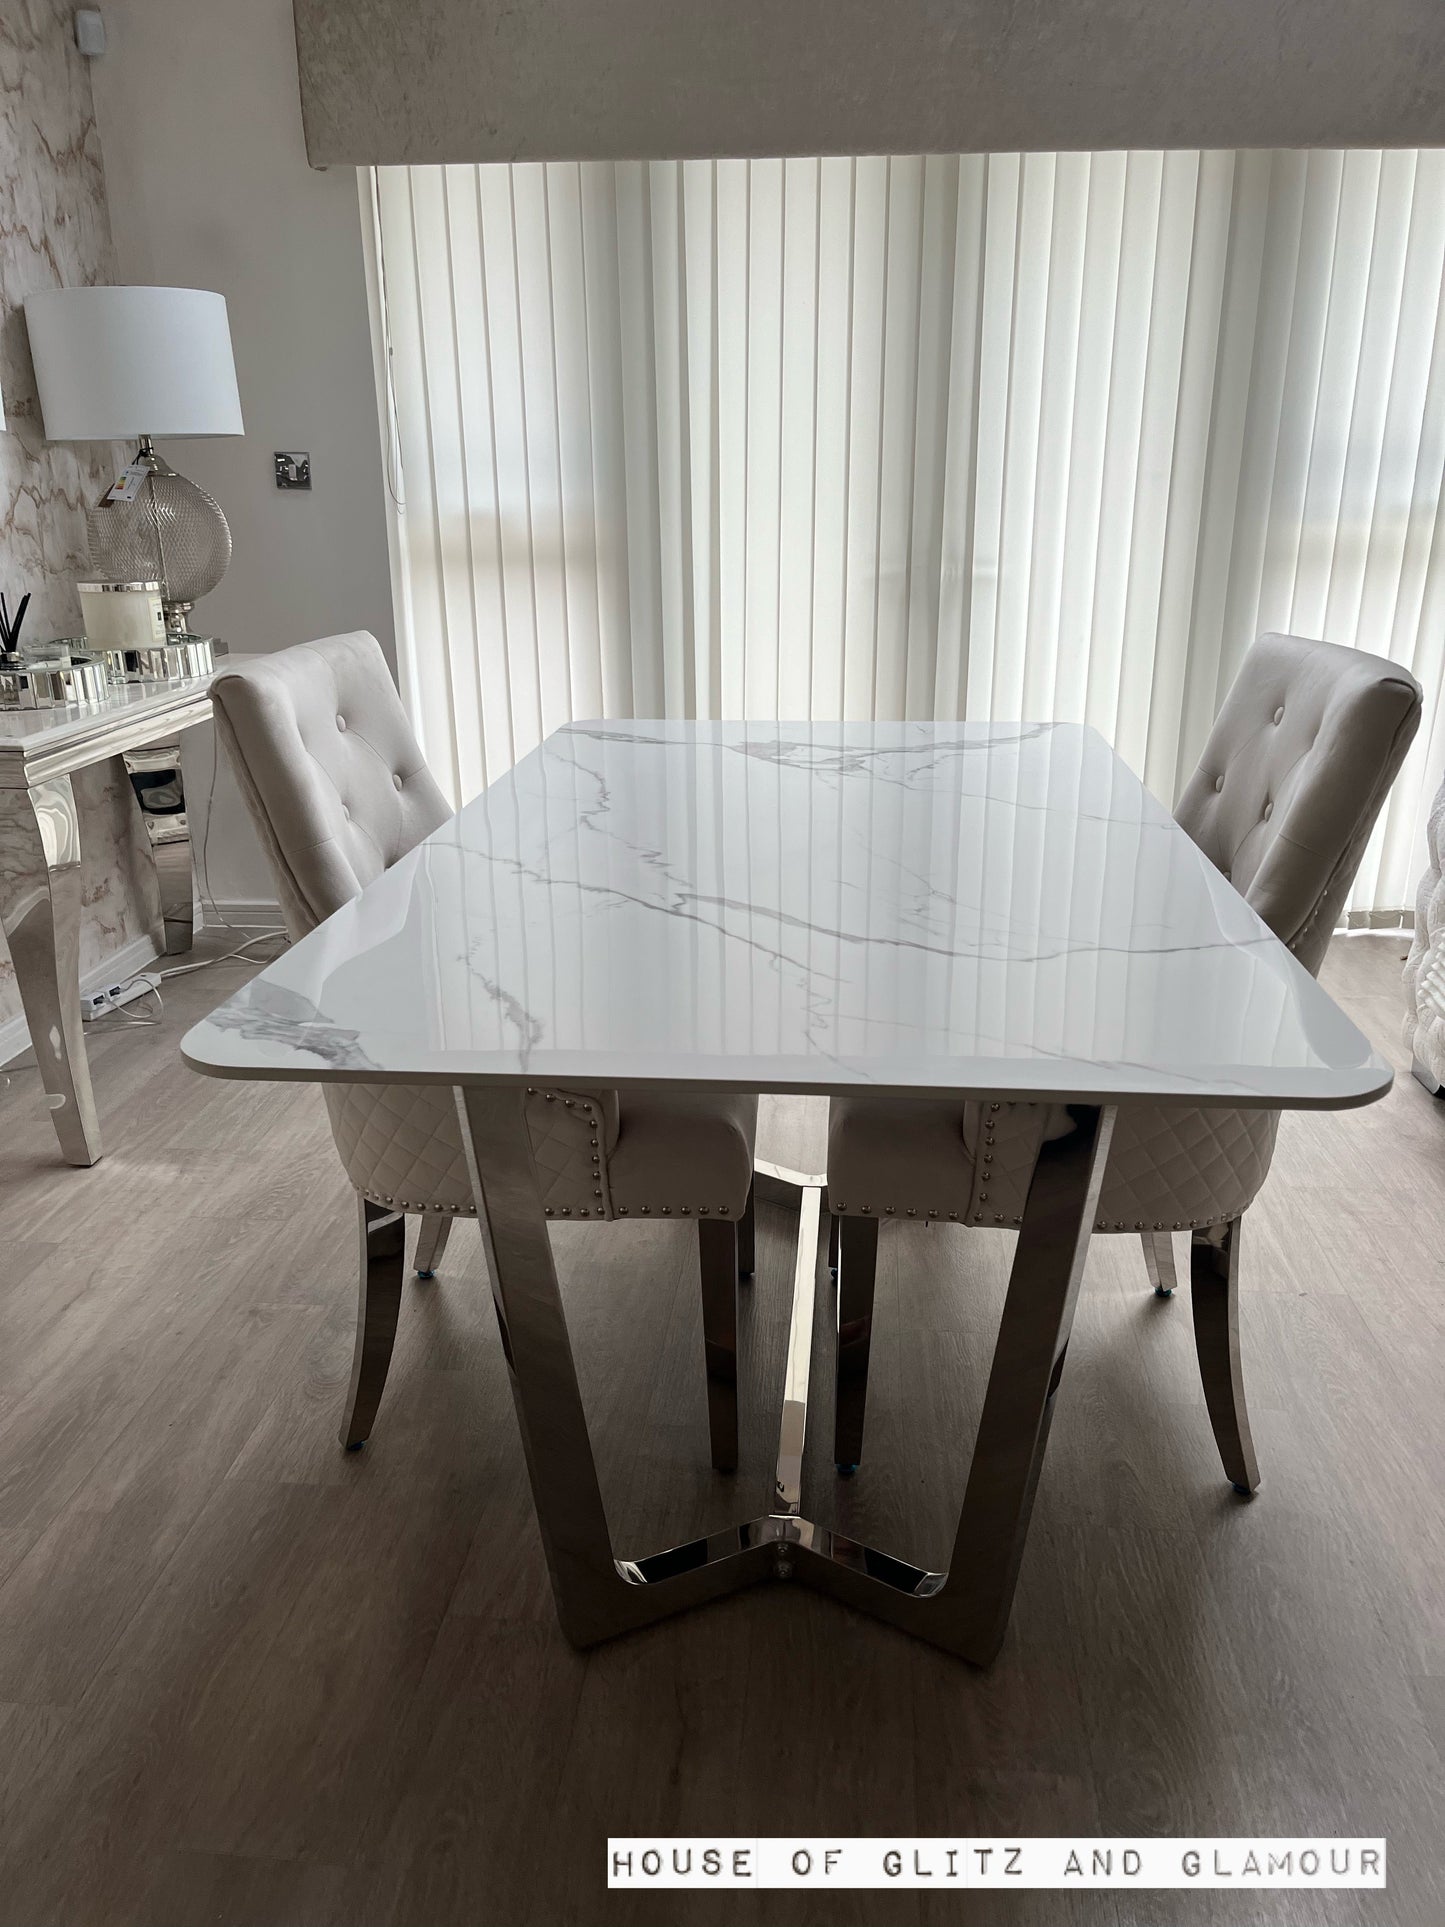 Display Item - Luca 1.6 Chrome Dining Table with Ice White Sintered Stone Top